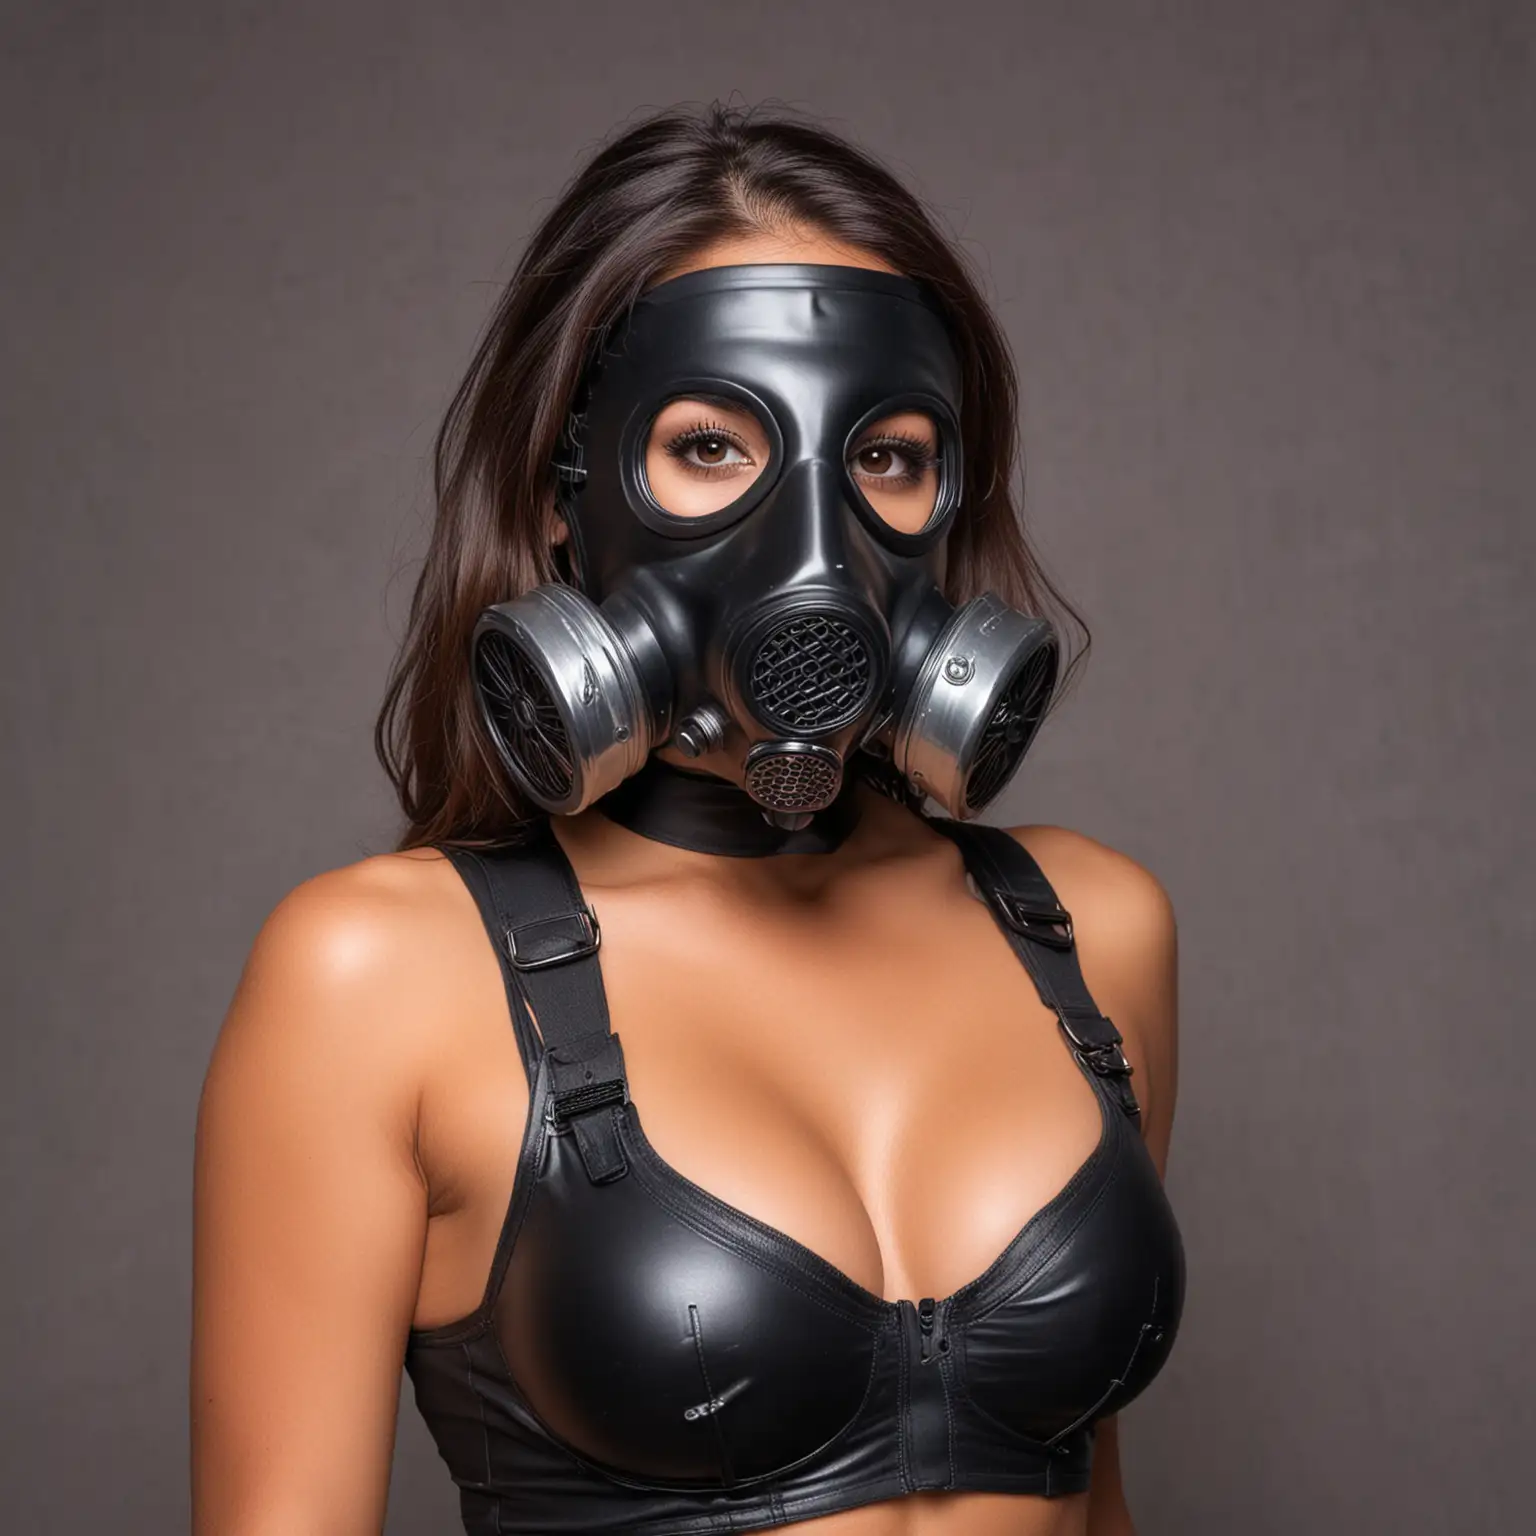 Seductive Latina Woman in Black Gas Mask Celebrating Kings Day in the Netherlands